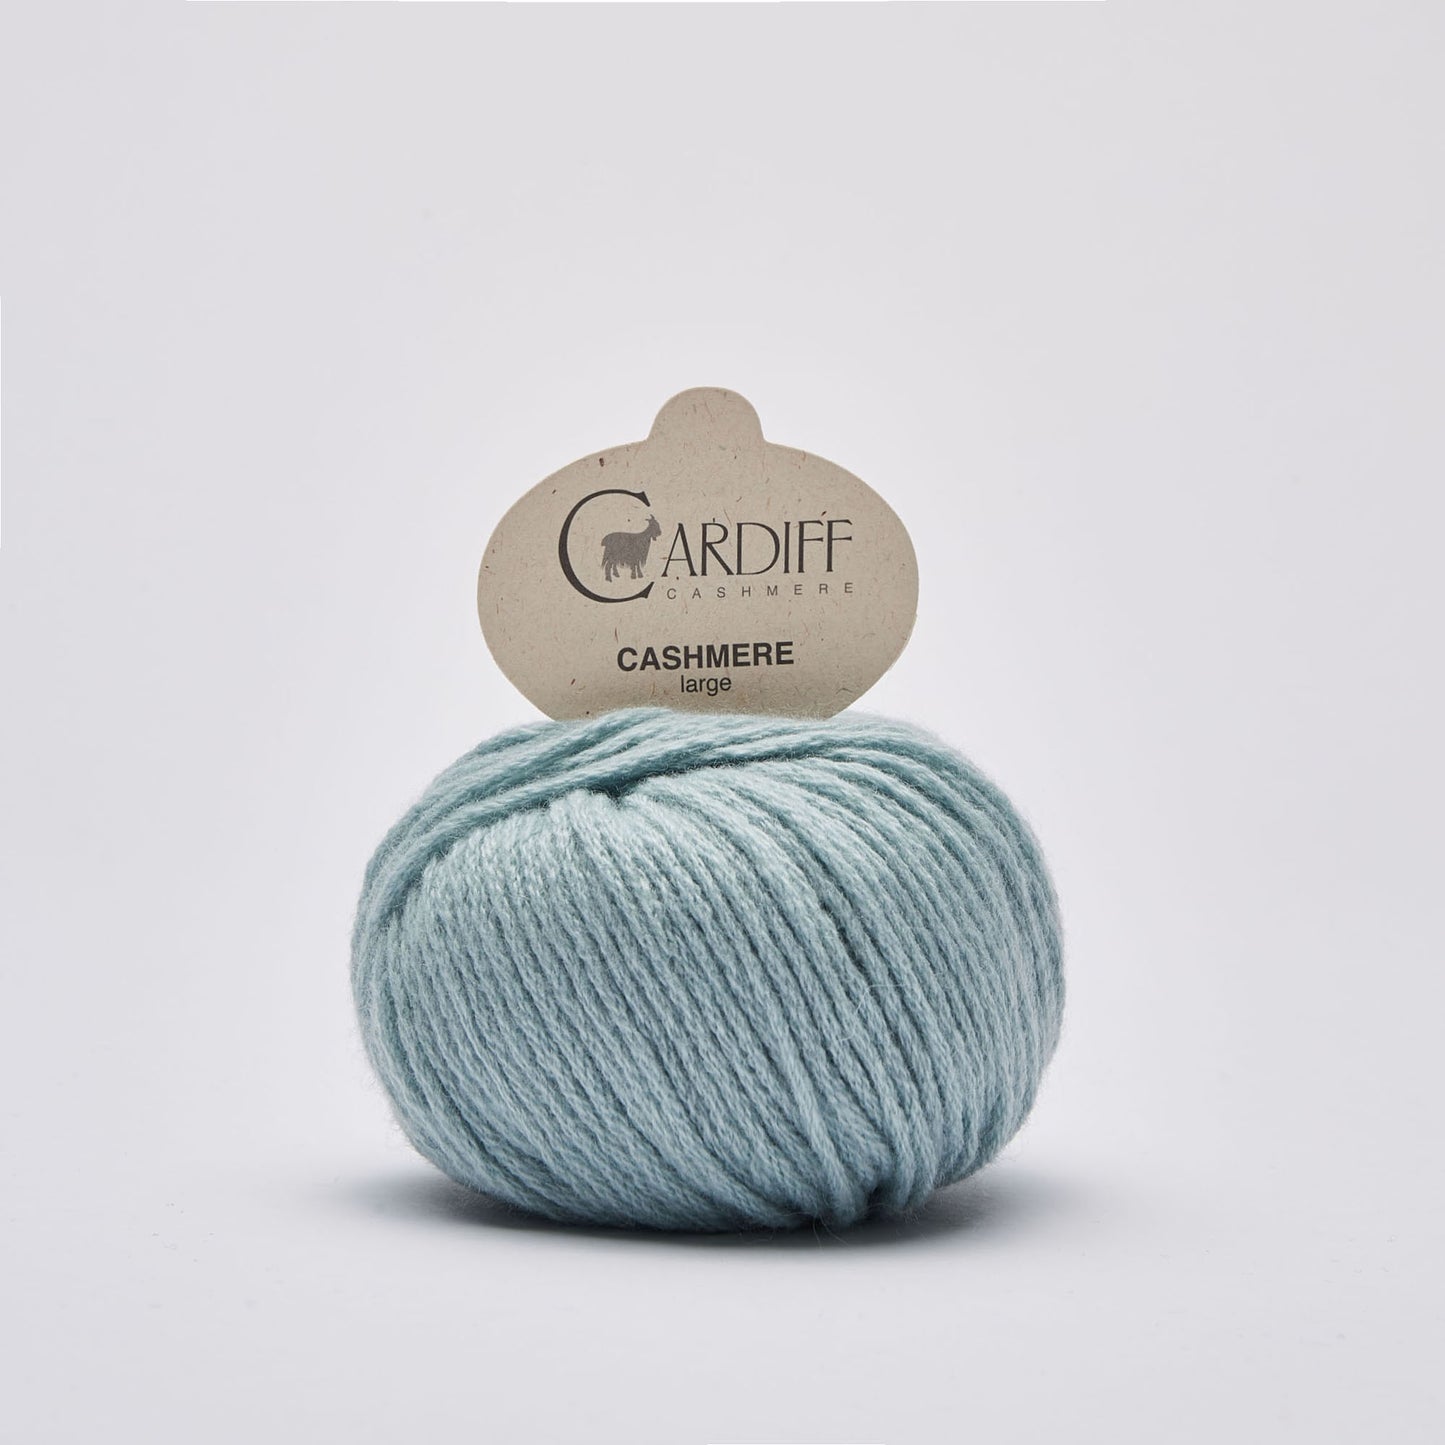 Cardiff LARGE gentle yarn, 677, MOSE, comp: 100% Cashmere